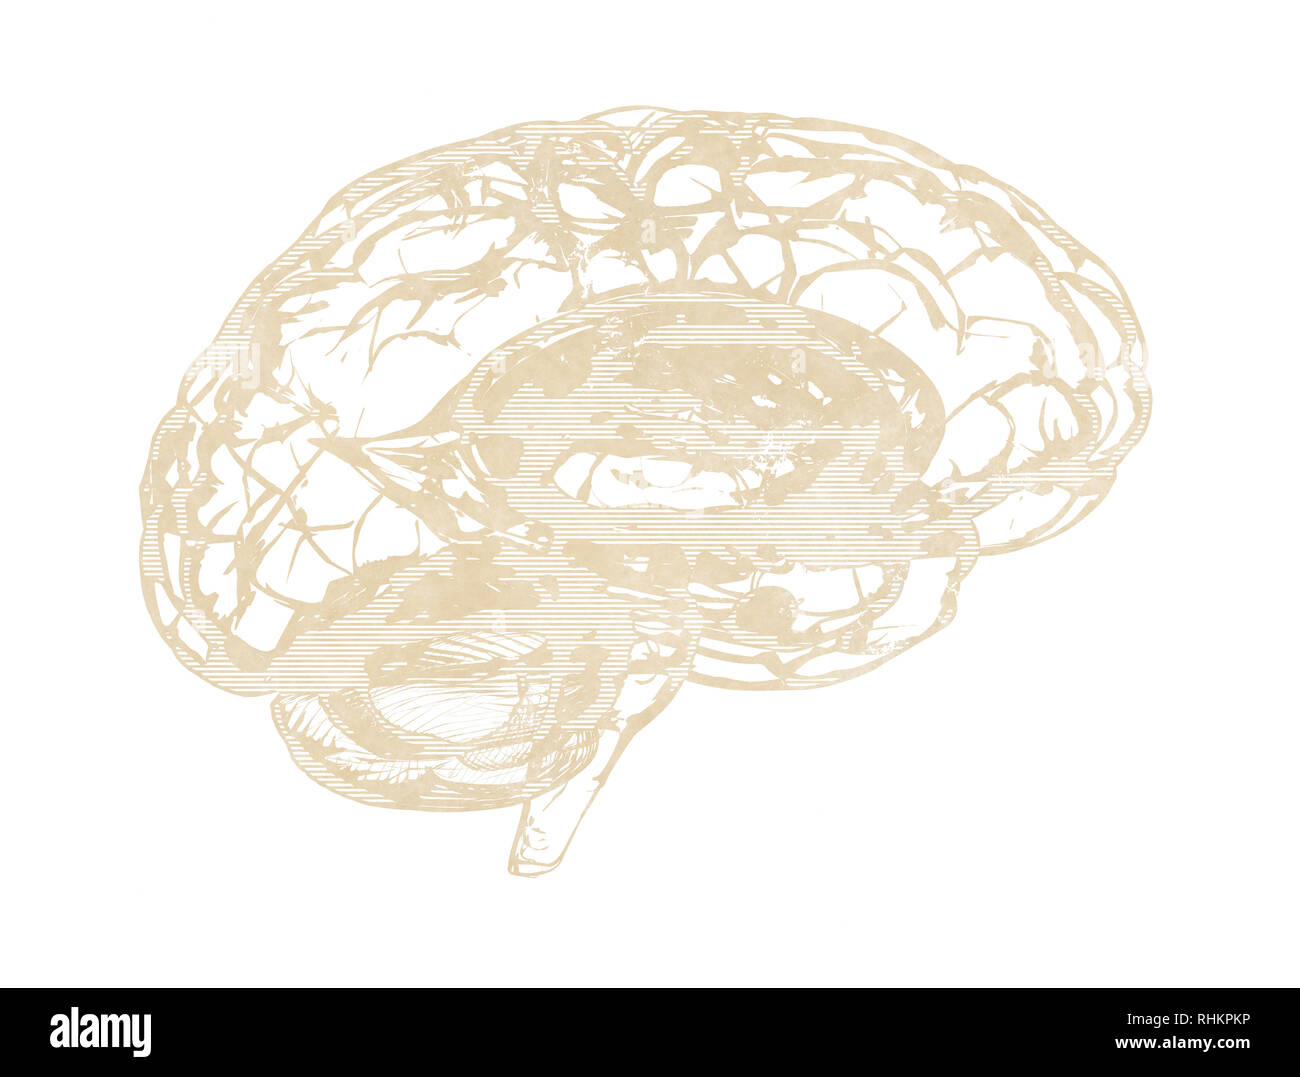 Human brain - side view blue 3d render isolated on white Stock Photo